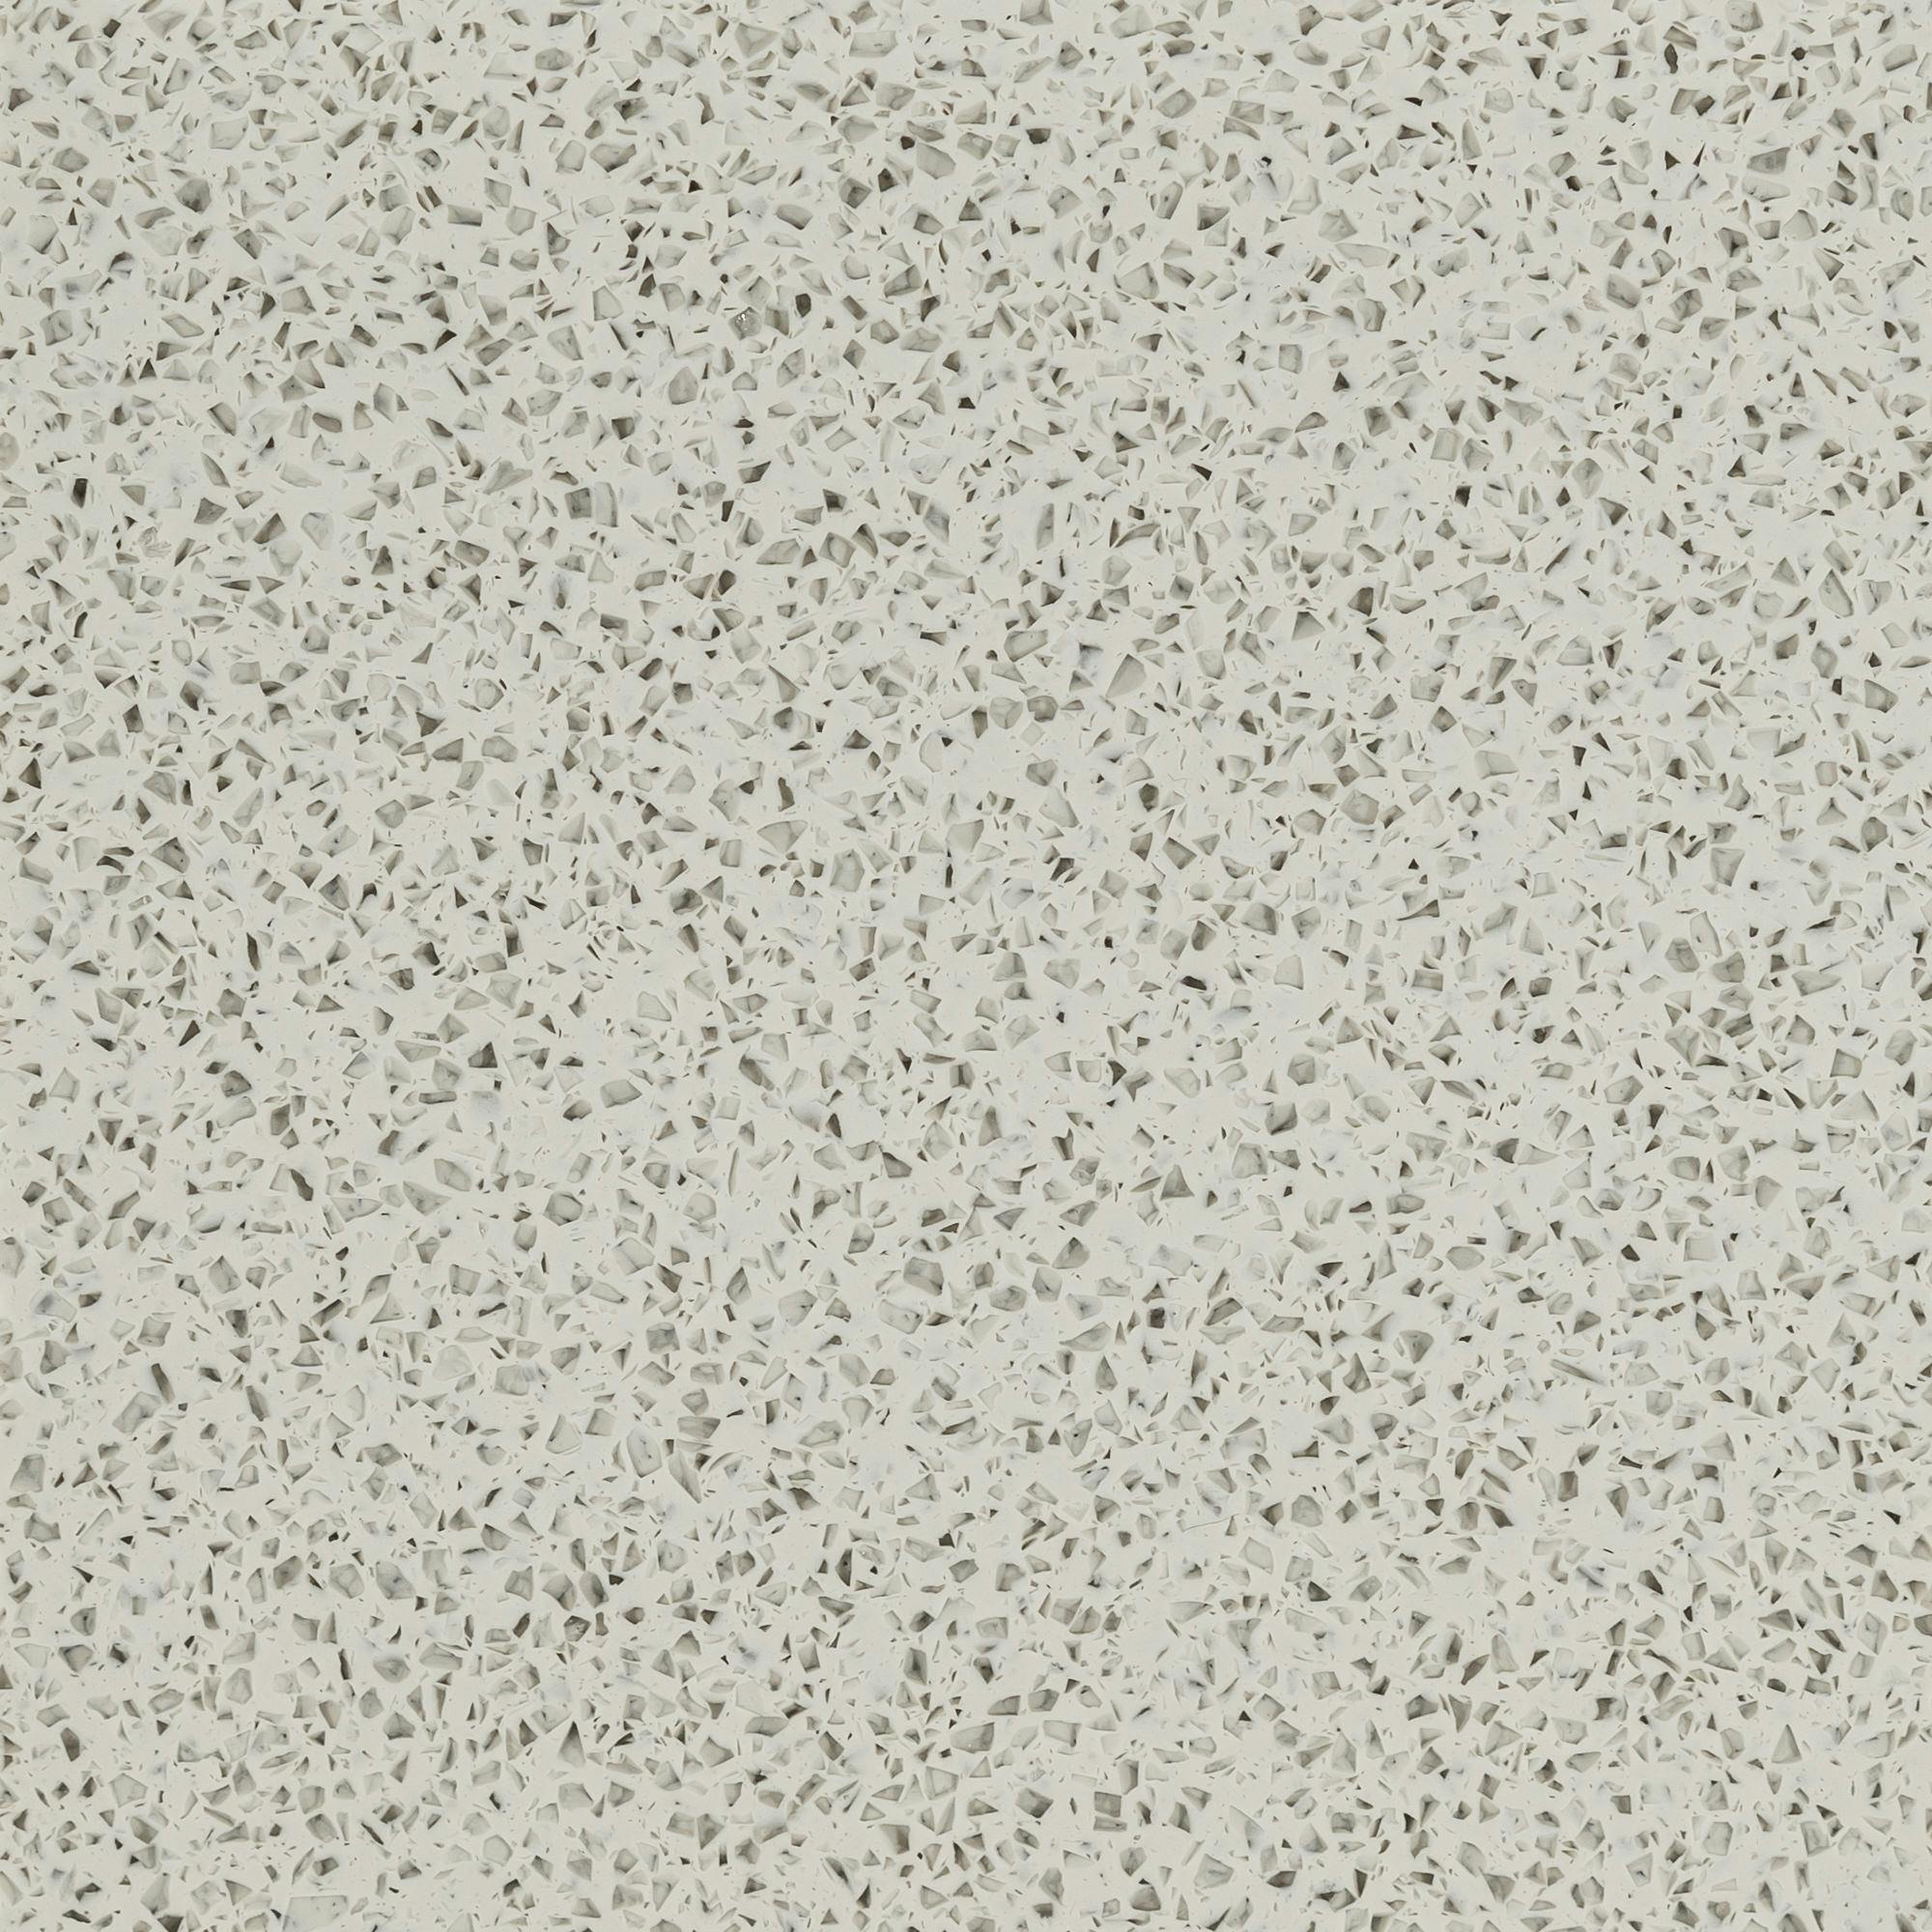 D0030 00 Durat 030 Grey clear small speckles sample